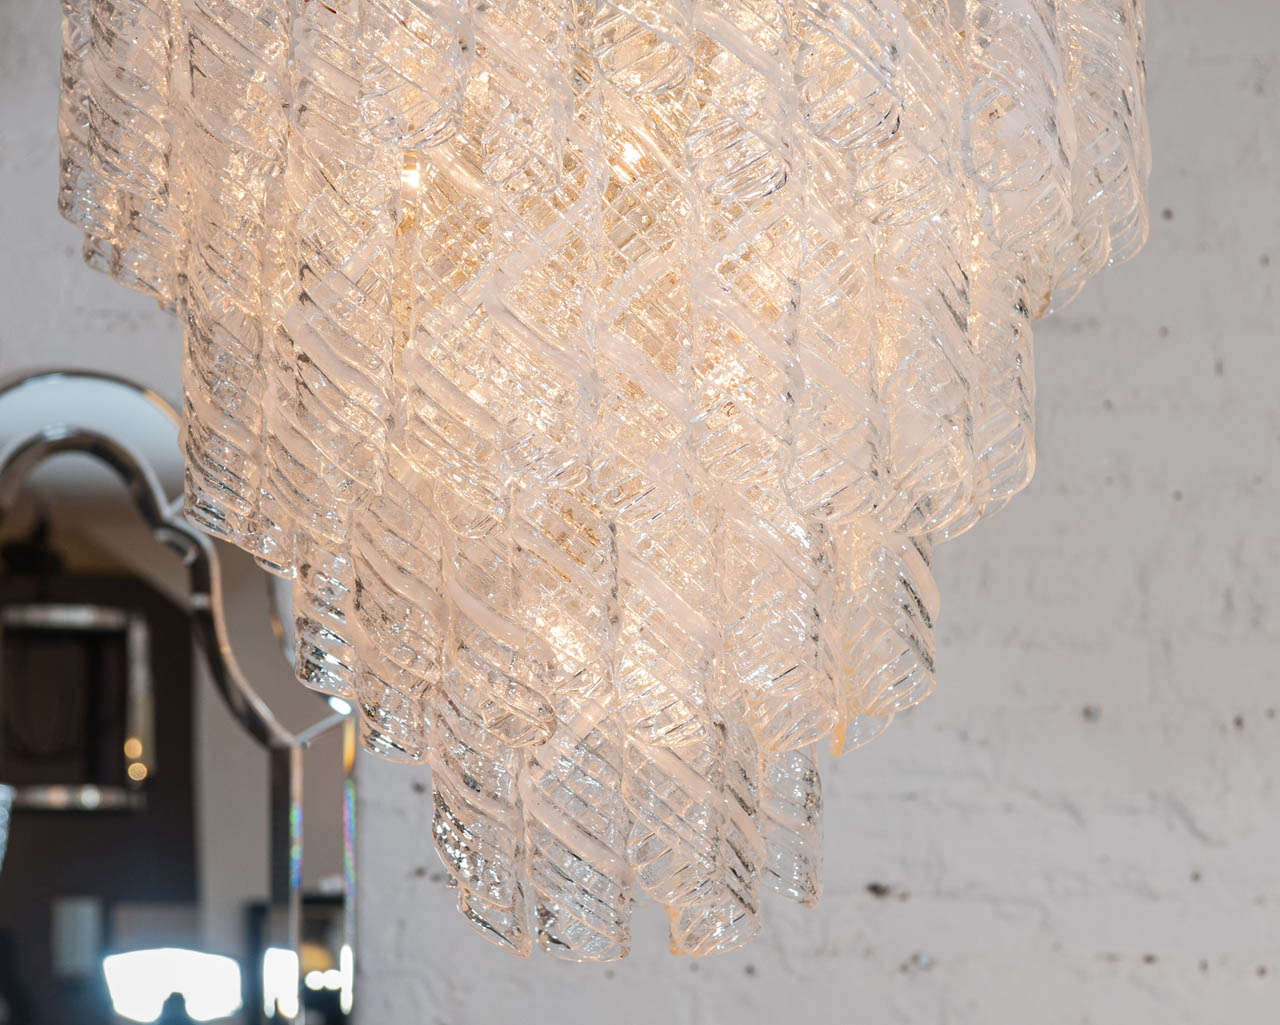 This large and impressive Murano pendant has 91 clear glass drops infused with a subtle 